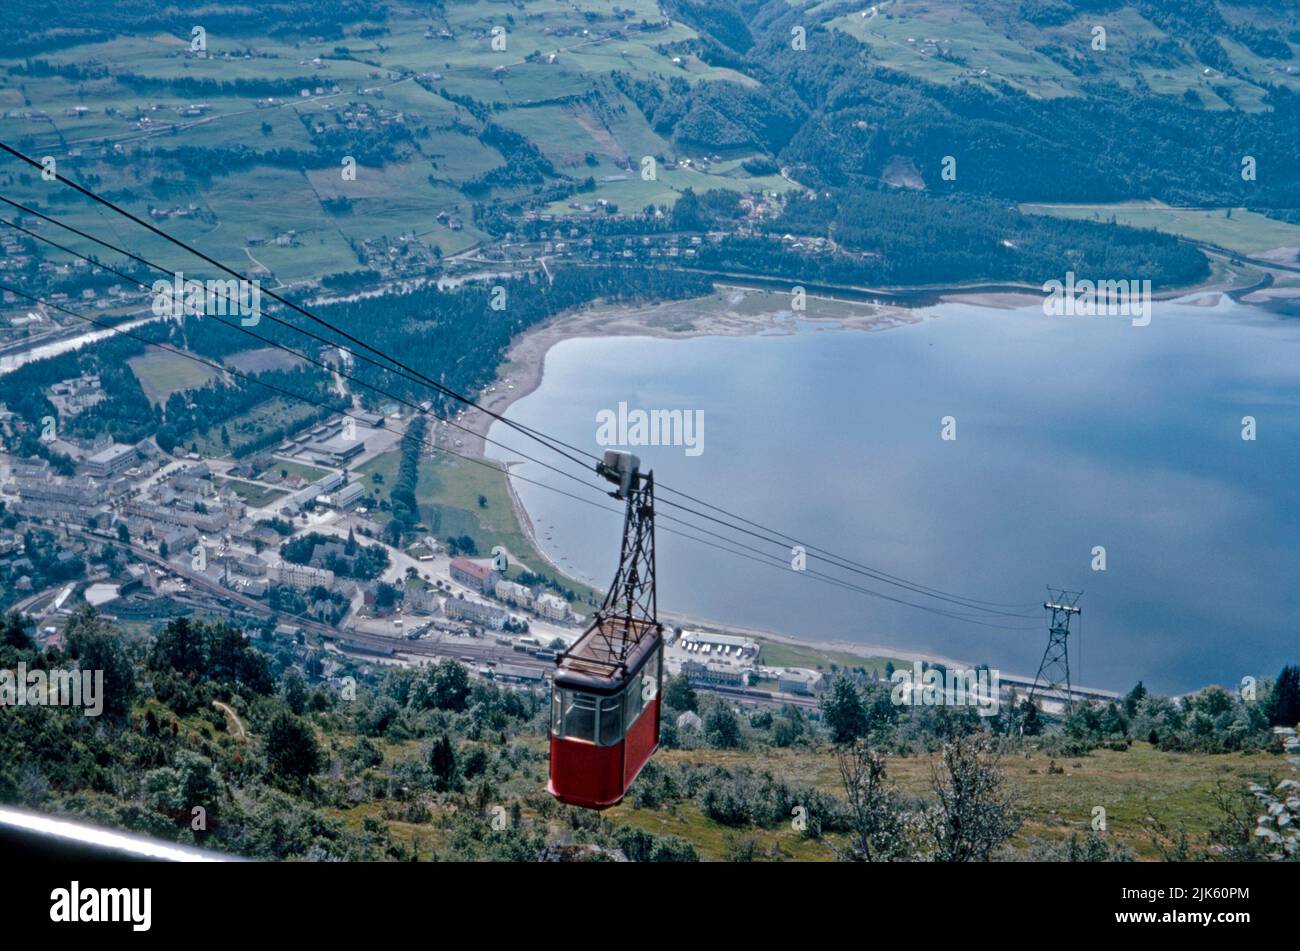 The cable car on its journey up to Mount Hanguren, Voss, Vestland, Norway in 1970. The resort of Voss is on the shore of Vangsvatnet lake. Skiing is the main activity in winter, in the summertime hiking, bike riding and water sports are popular. A new, replacement ride up the mountain, the Voss Gondol opened in 2019. It is largest mountain gondola in Northern Europe. This image is from an amateur 35mm colour transparency – a vintage 1970s photograph. Stock Photo